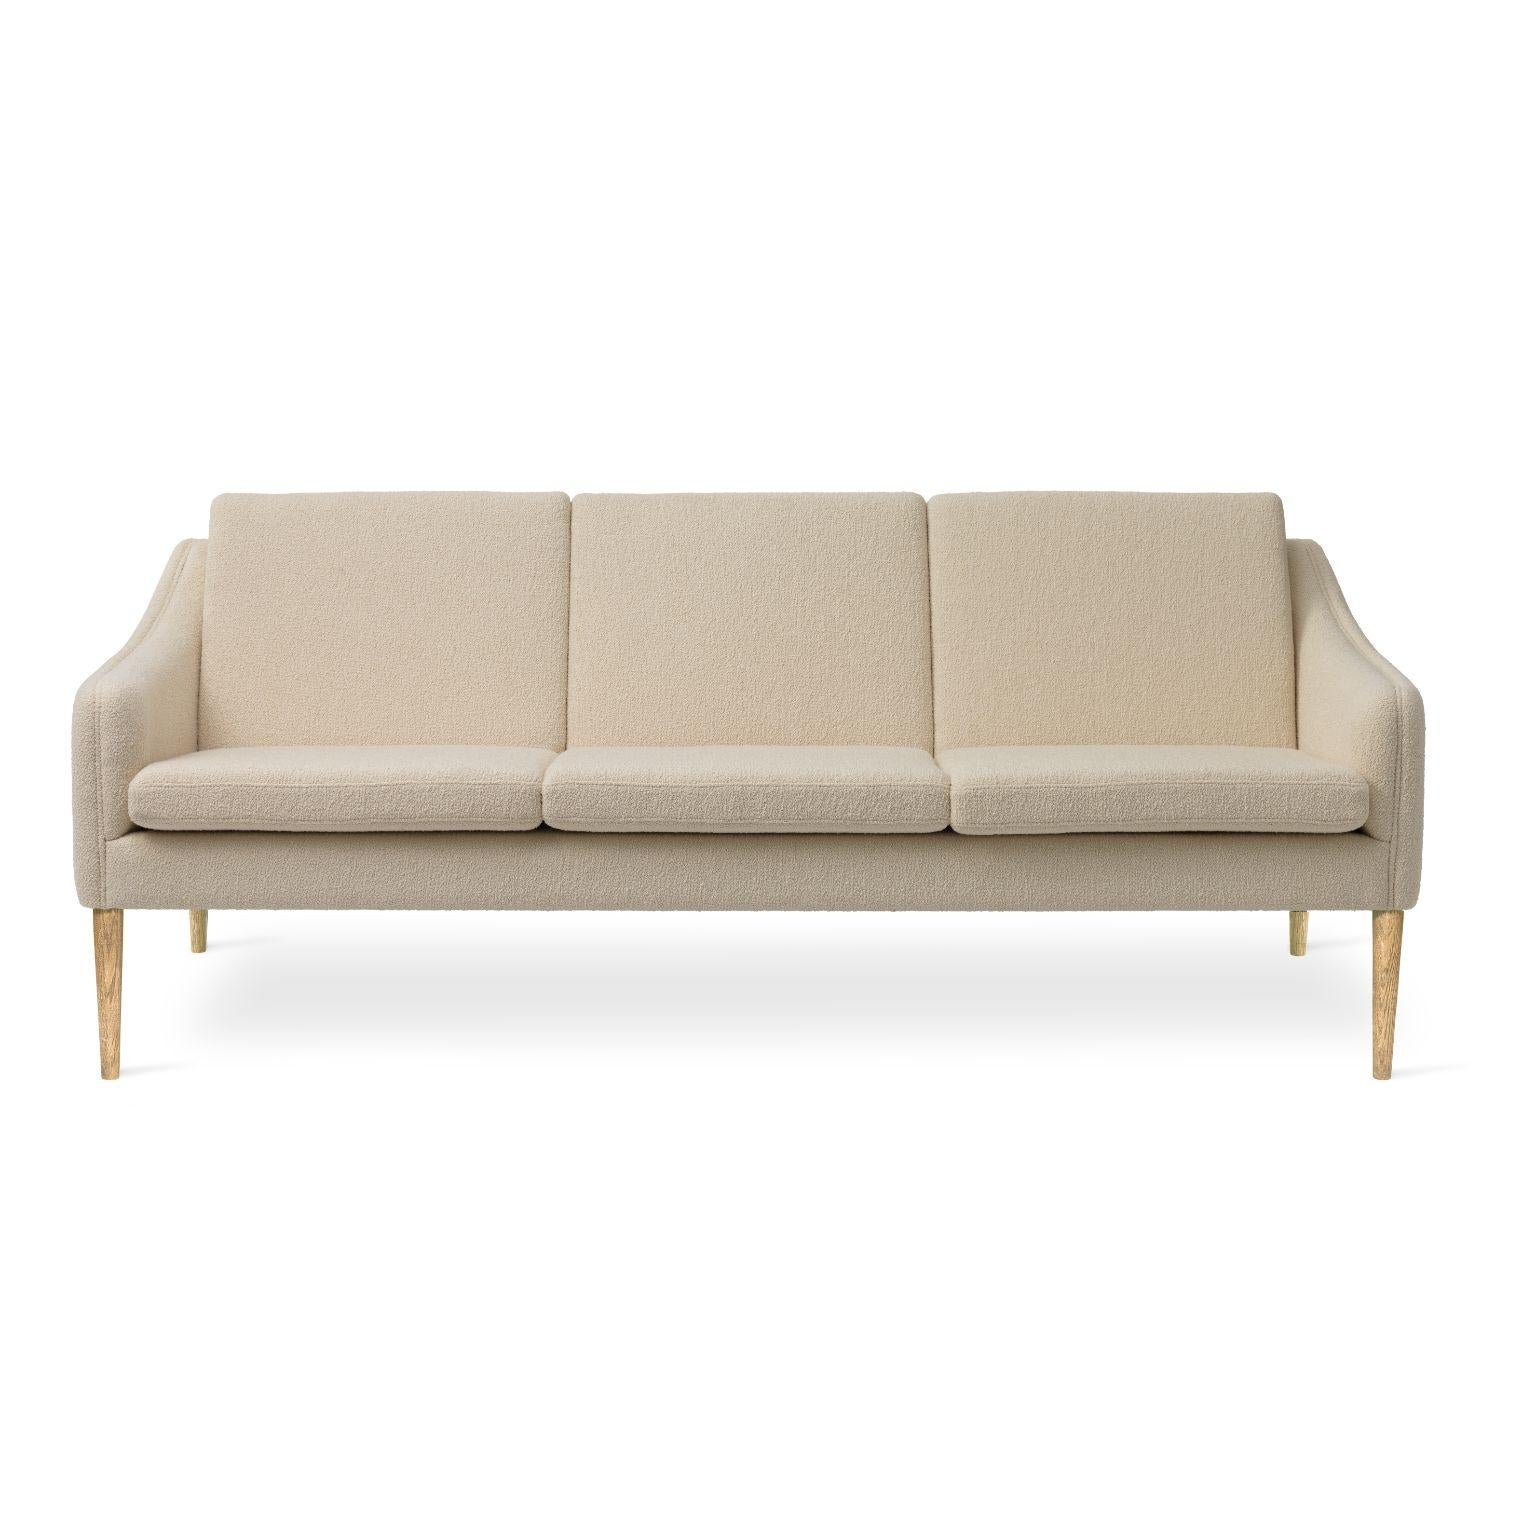 Mr Olsen 3 seater oak cream by Warm Nordic
Dimensions: D201 x W79 x H 78/46 cm
Material: textile upholstery, foam, spring system, solid oiled oak legs, solid smoked oak legs
Weight: 50 kg
Also available in different colours and finishes. 

A